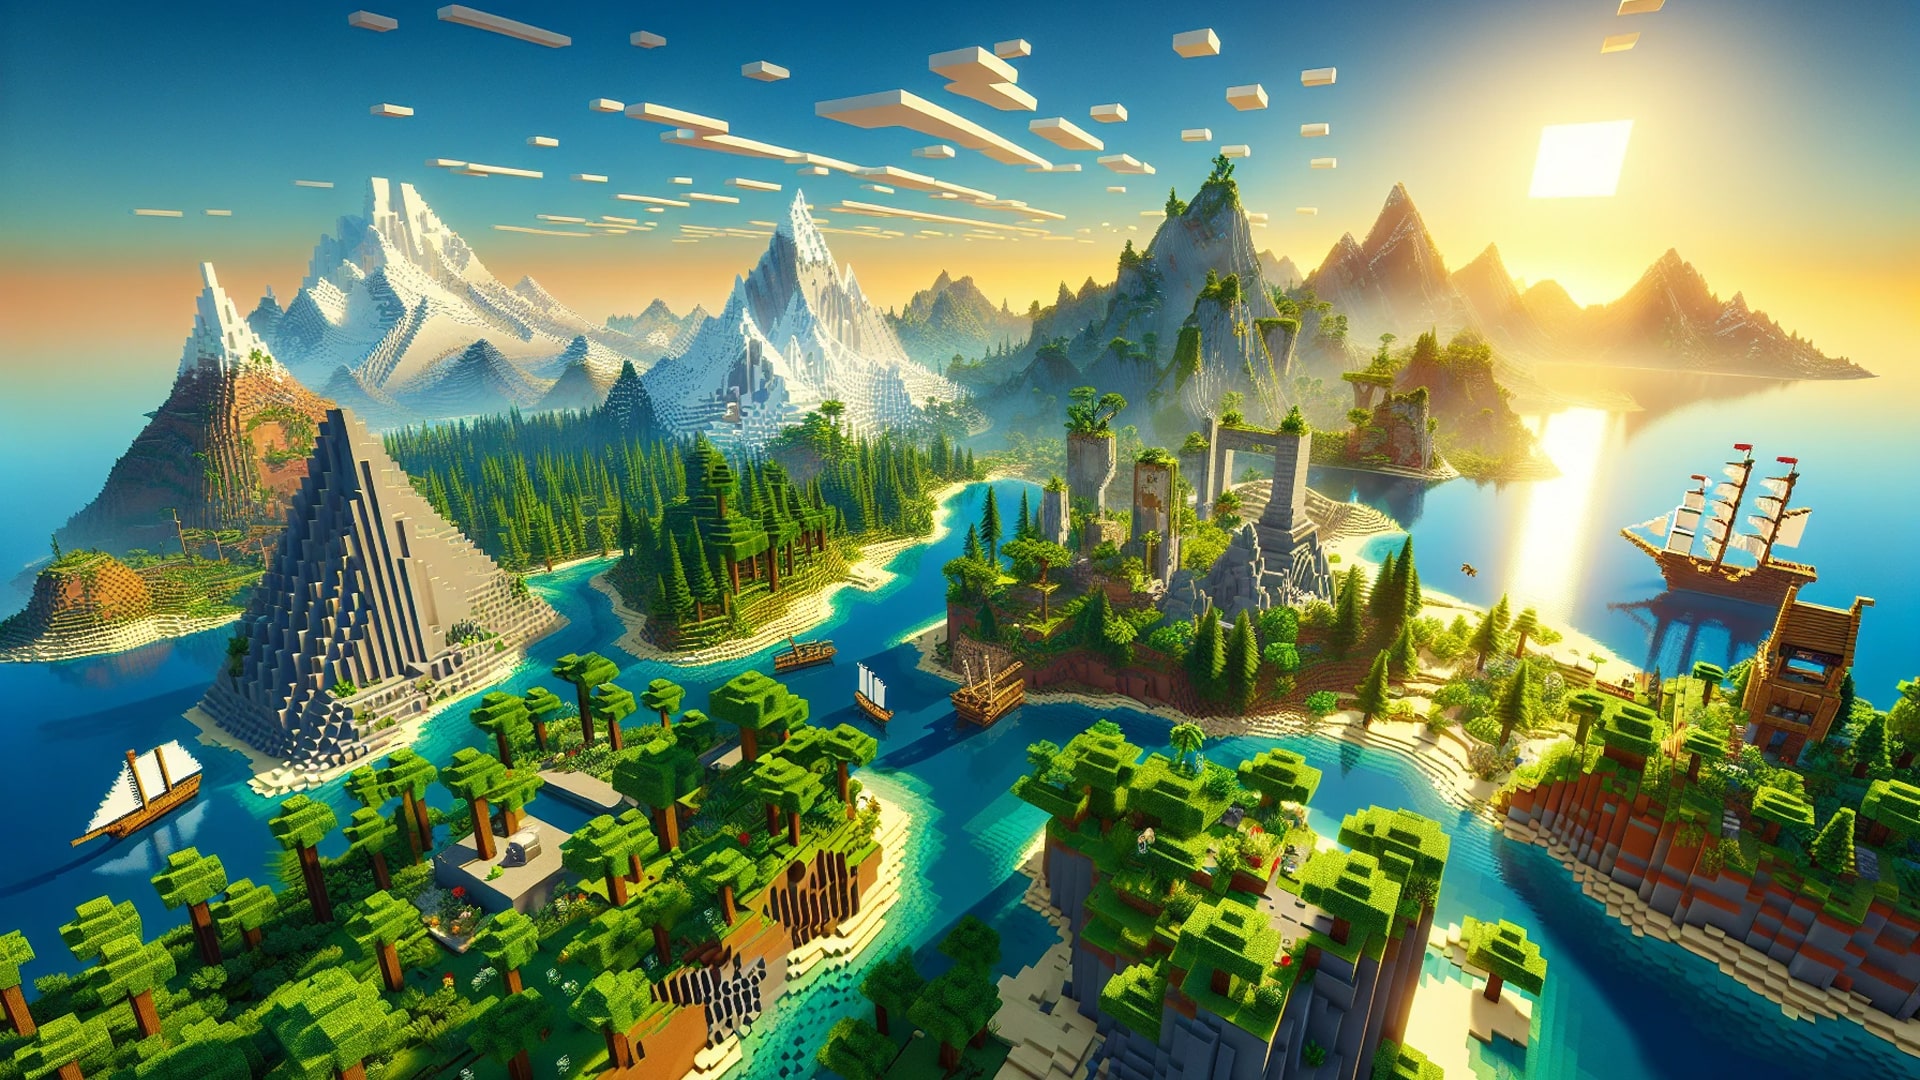 A vast and colorful Minecraft world with various landscapes and structures